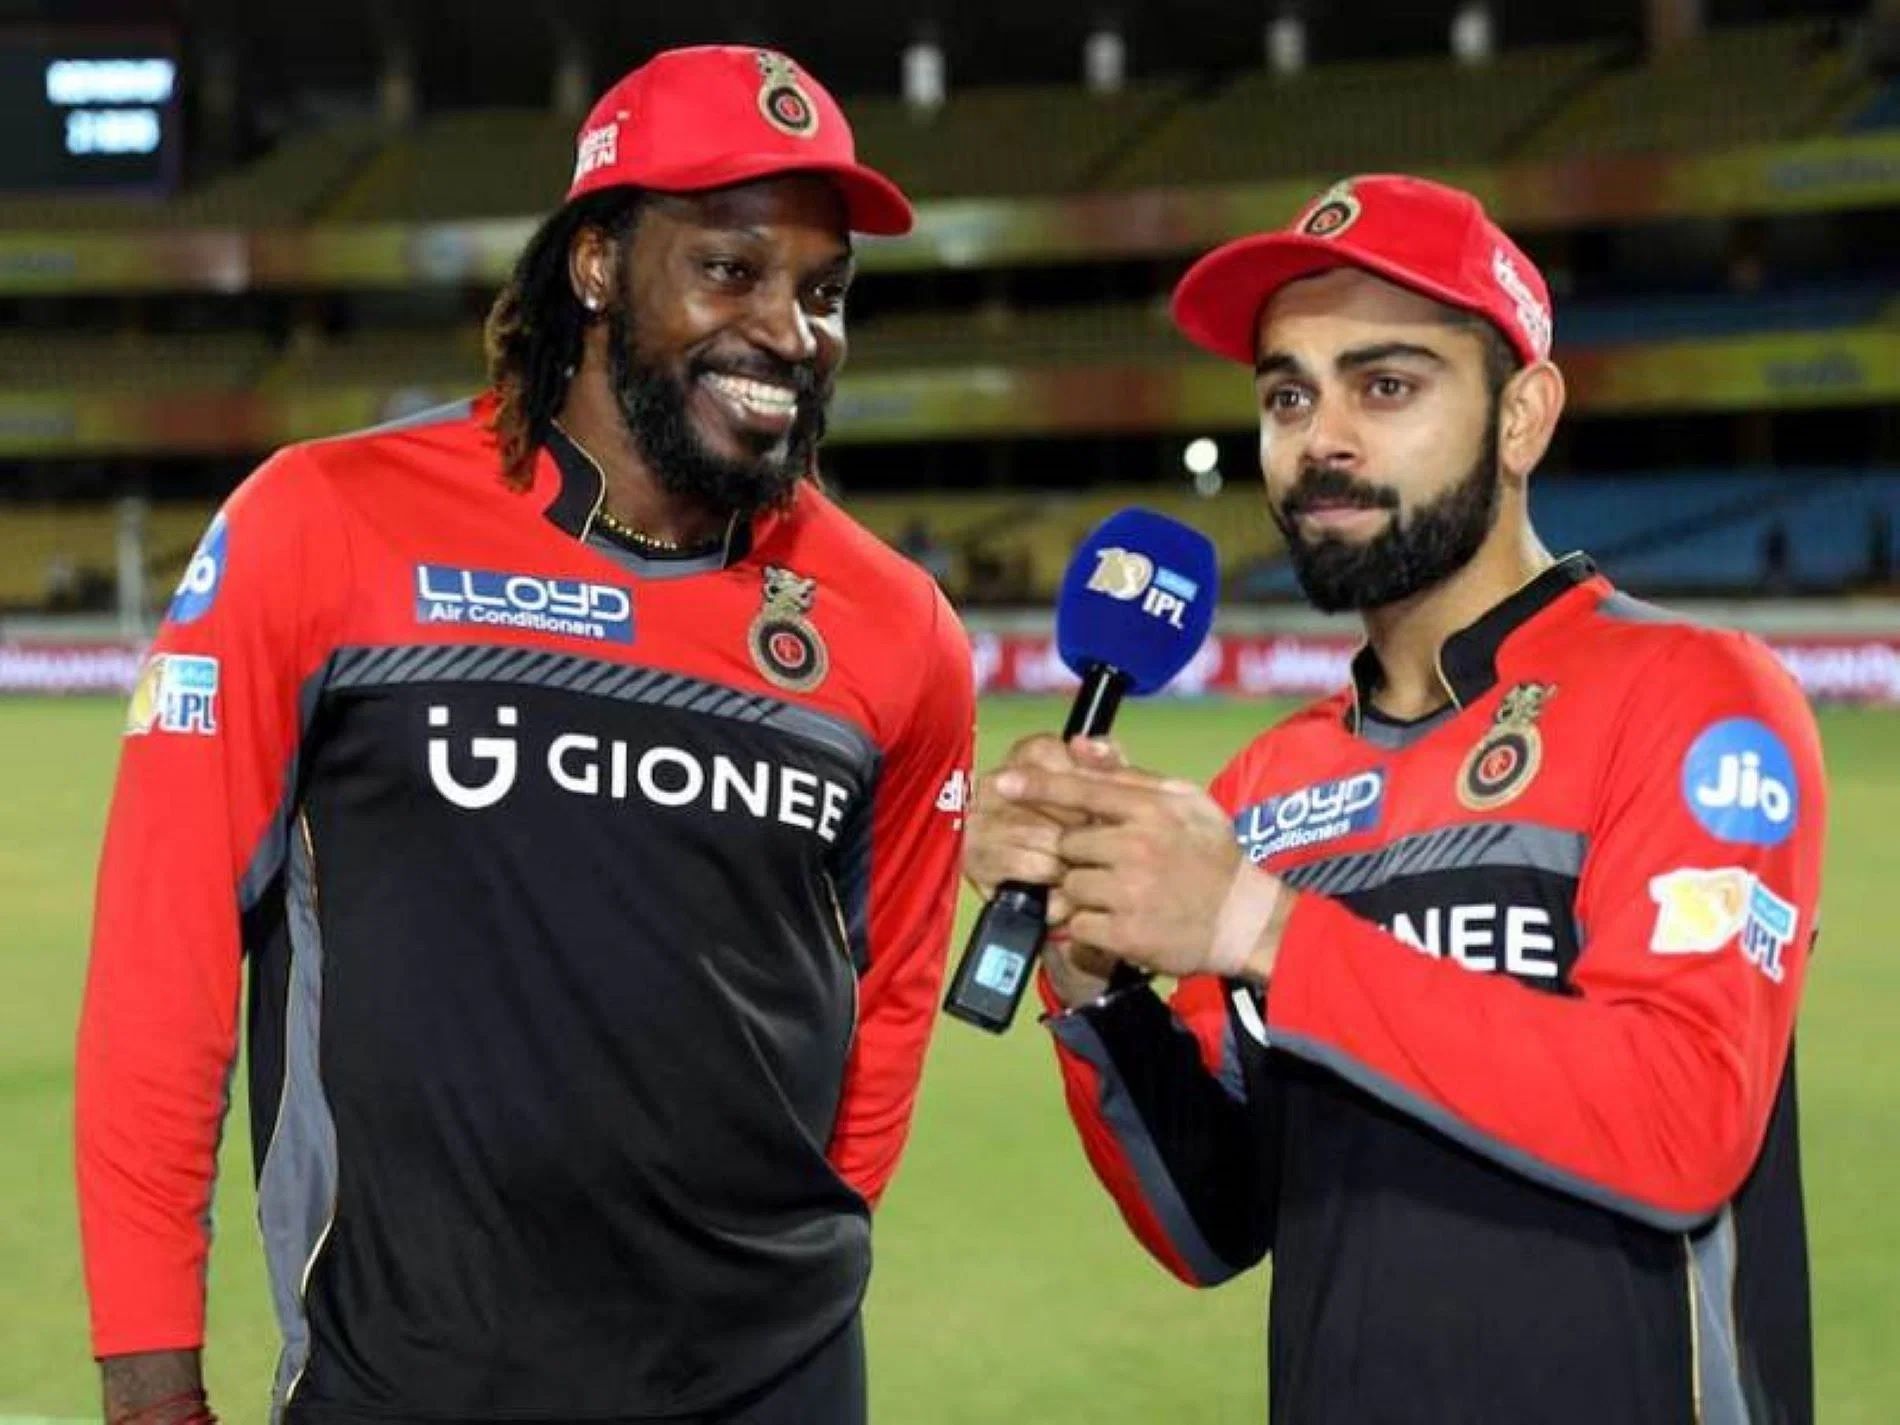 Chris Gayle and Virat Kohli played together for RCB in the IPL.